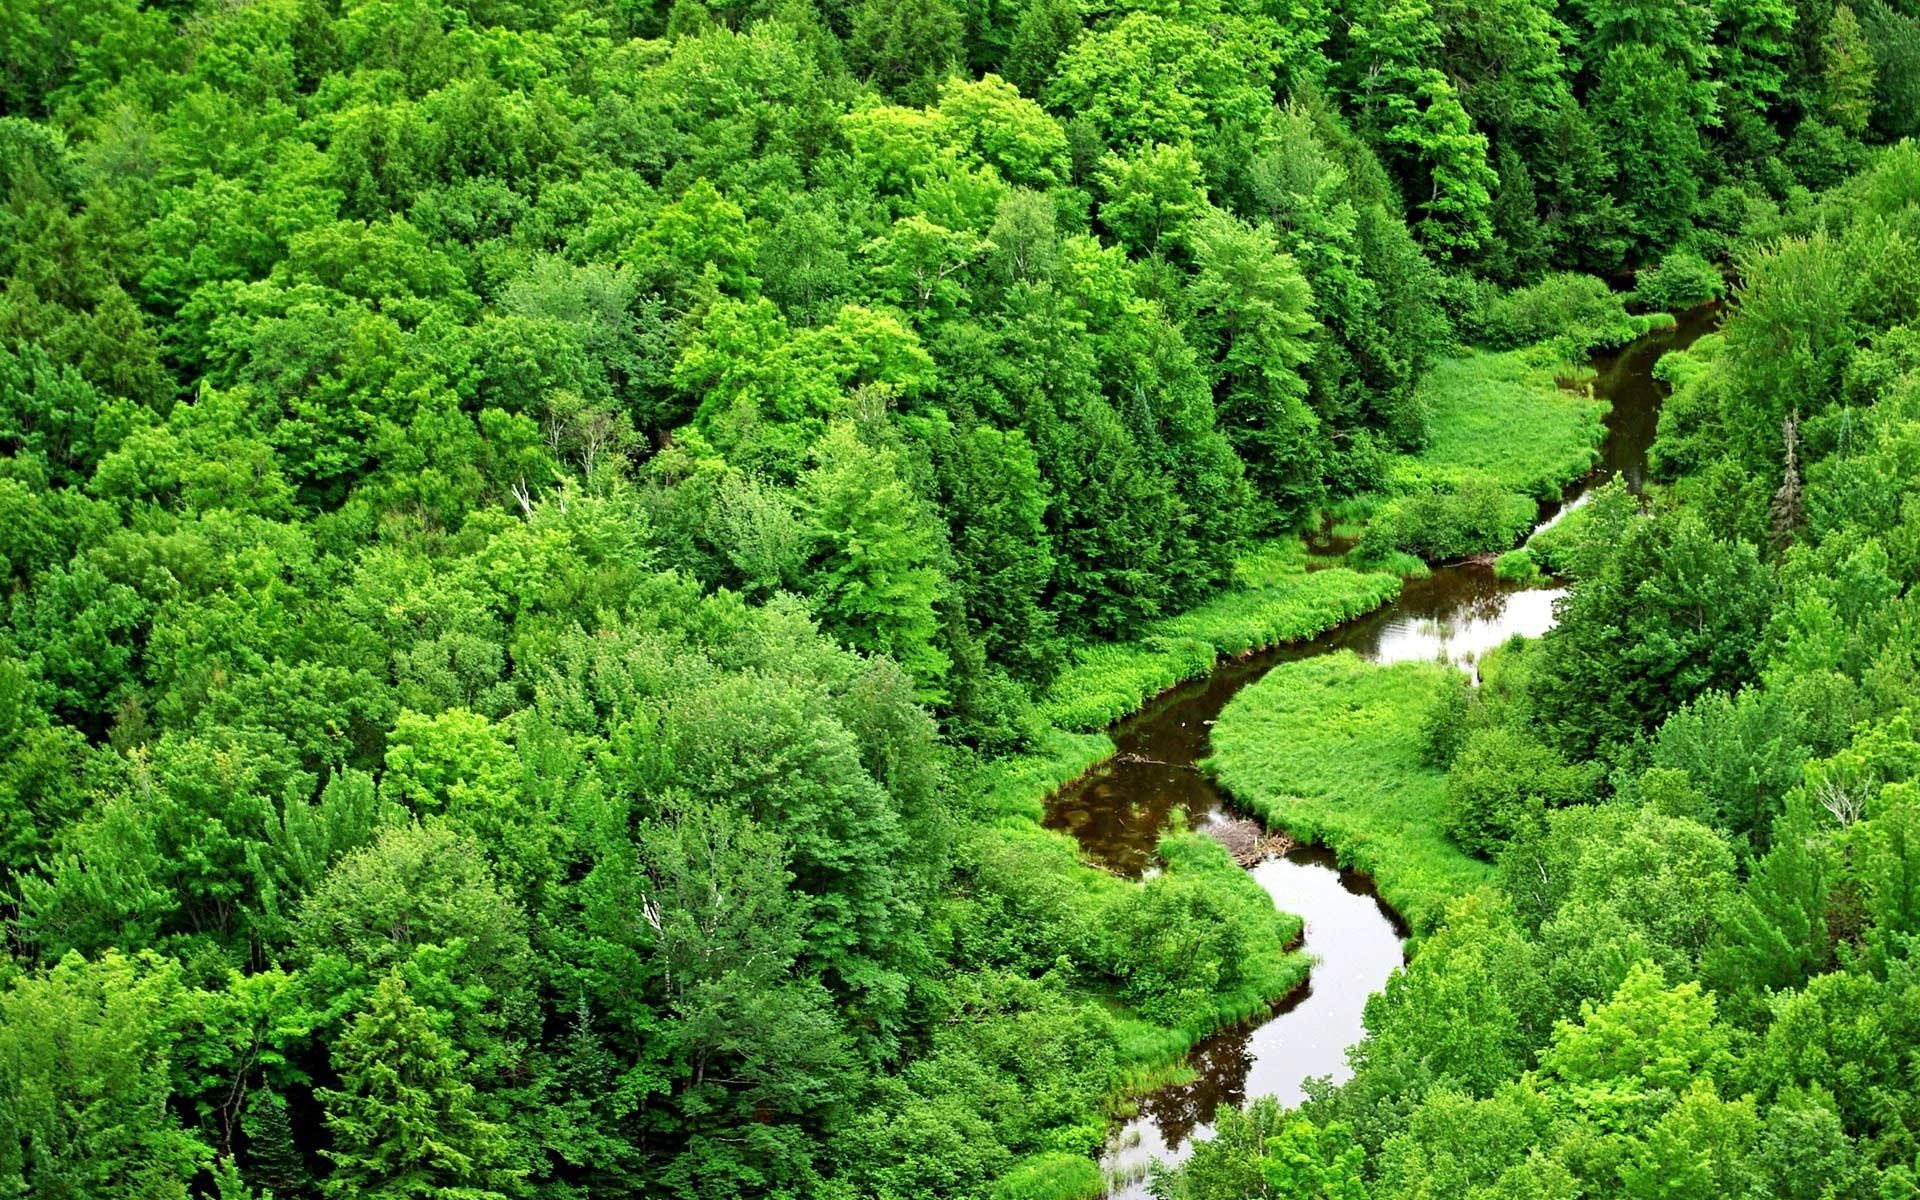 Wallpapers Backgrounds – forest green scenery wallpapers landscape stream river awesome